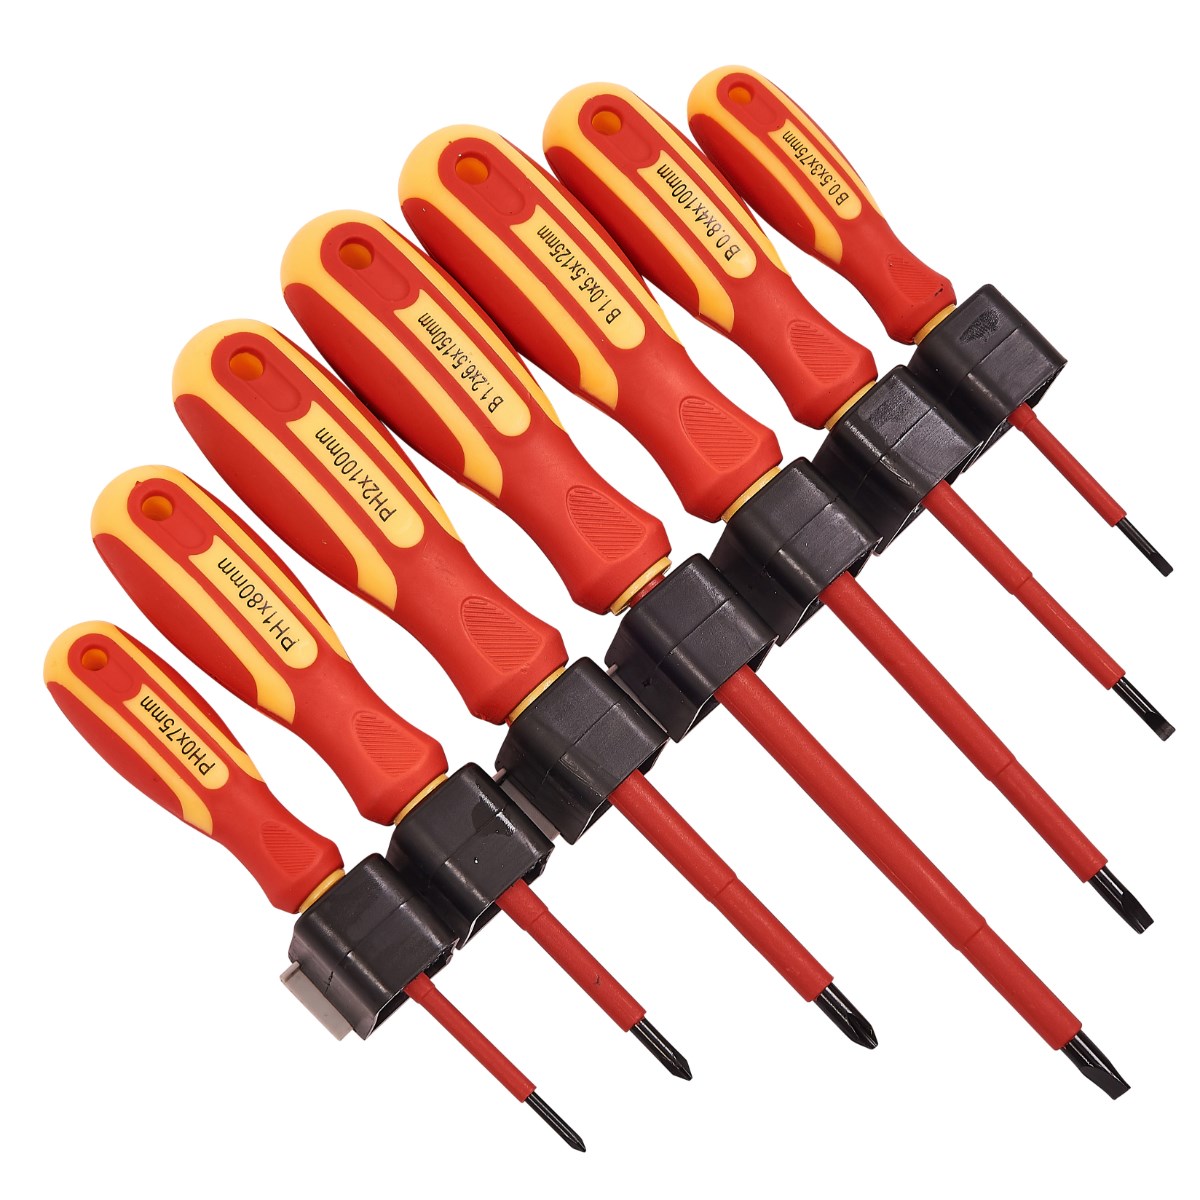 7pc VDE Screwdriver Set Electricians Insulated 1000v Slotted Phillips Drivers 